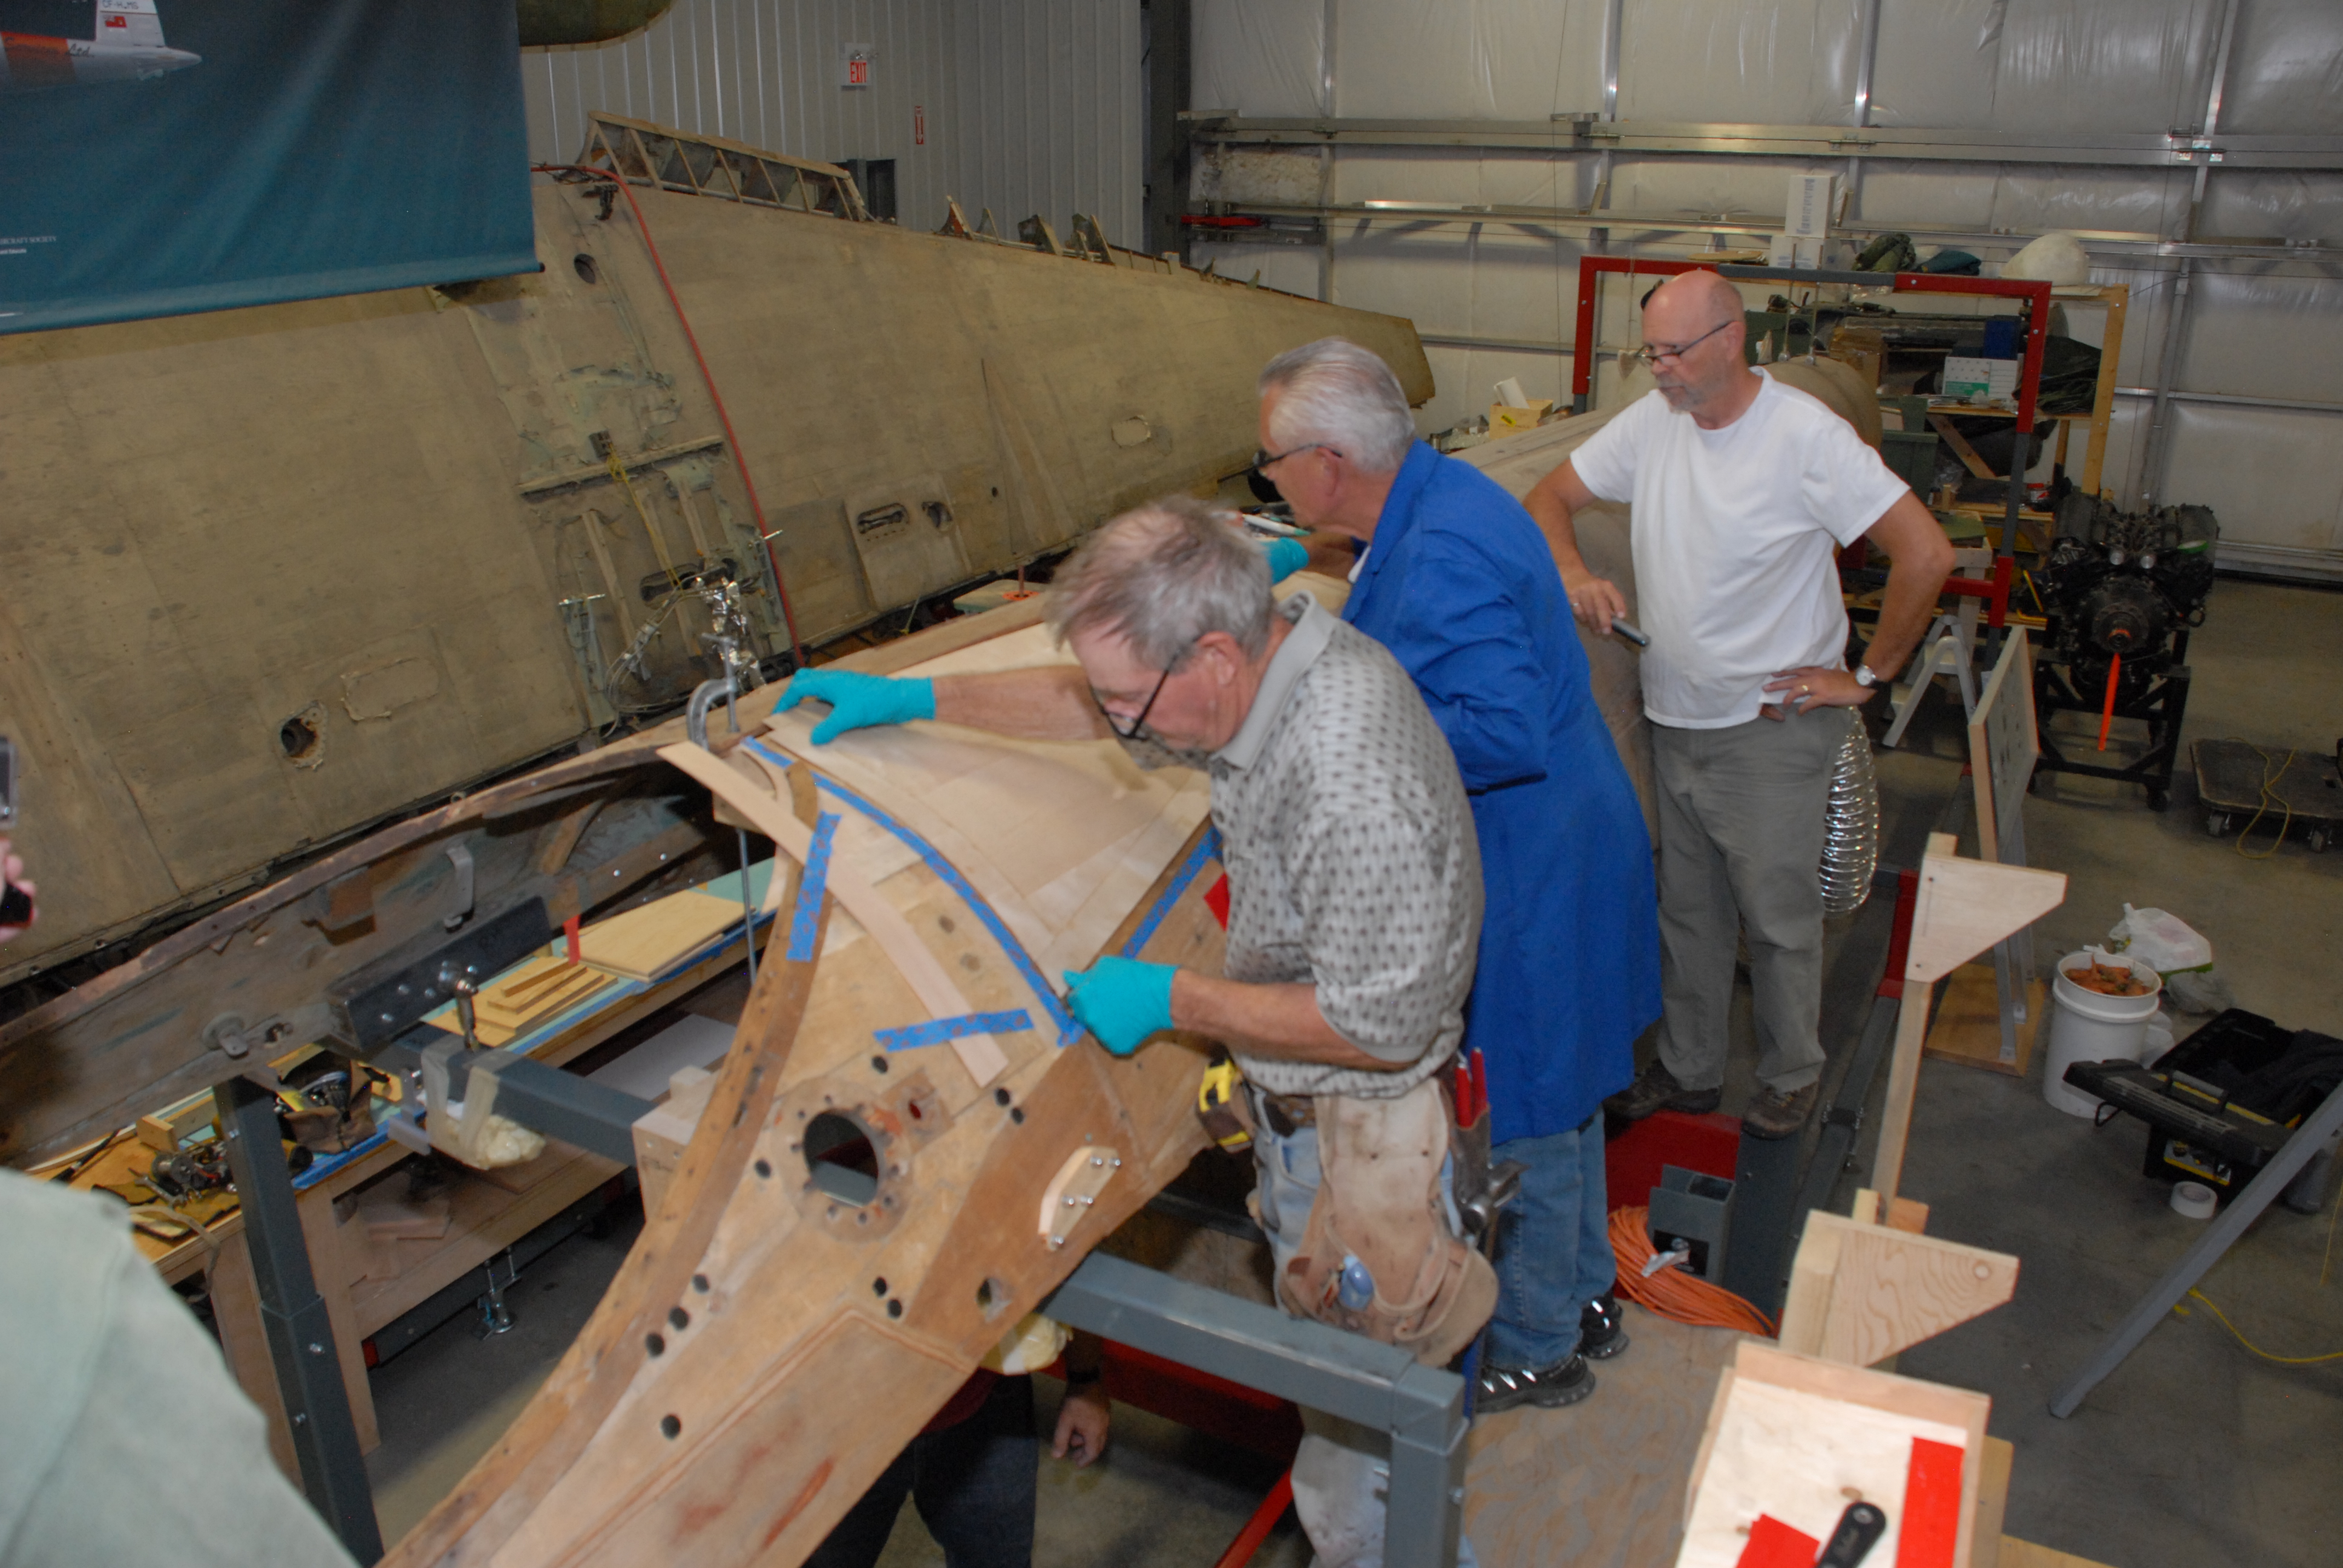 Roger and Dick (with Andy 'supervising') install the first new skin on the upper fuselage, just aft of the cockpit.